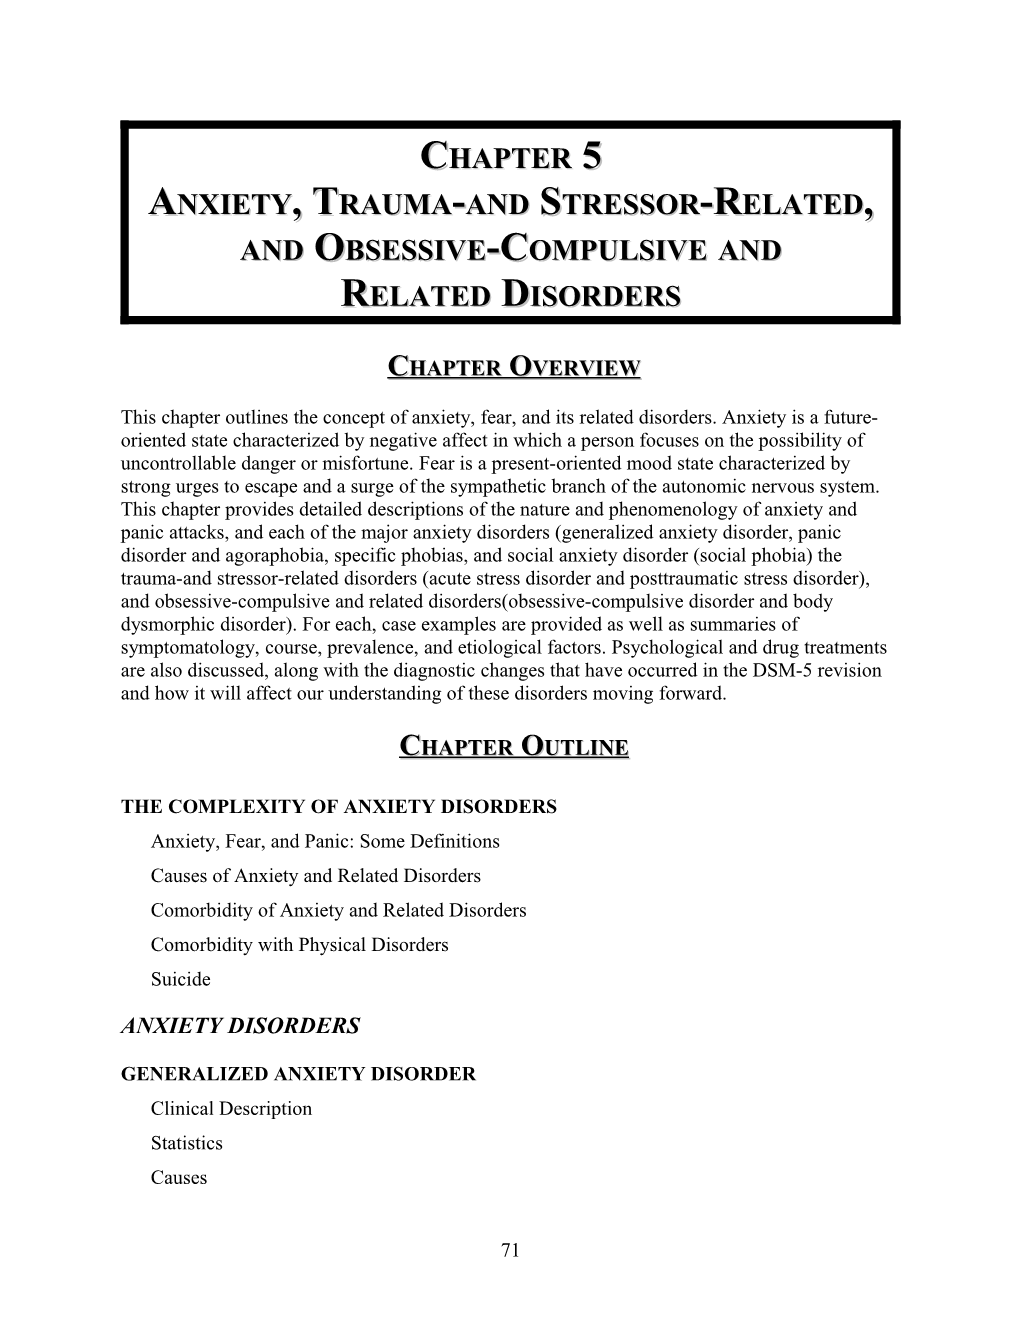 Anxiety, Trauma-And Stressor-Related, and Obsessive-Compulsive And